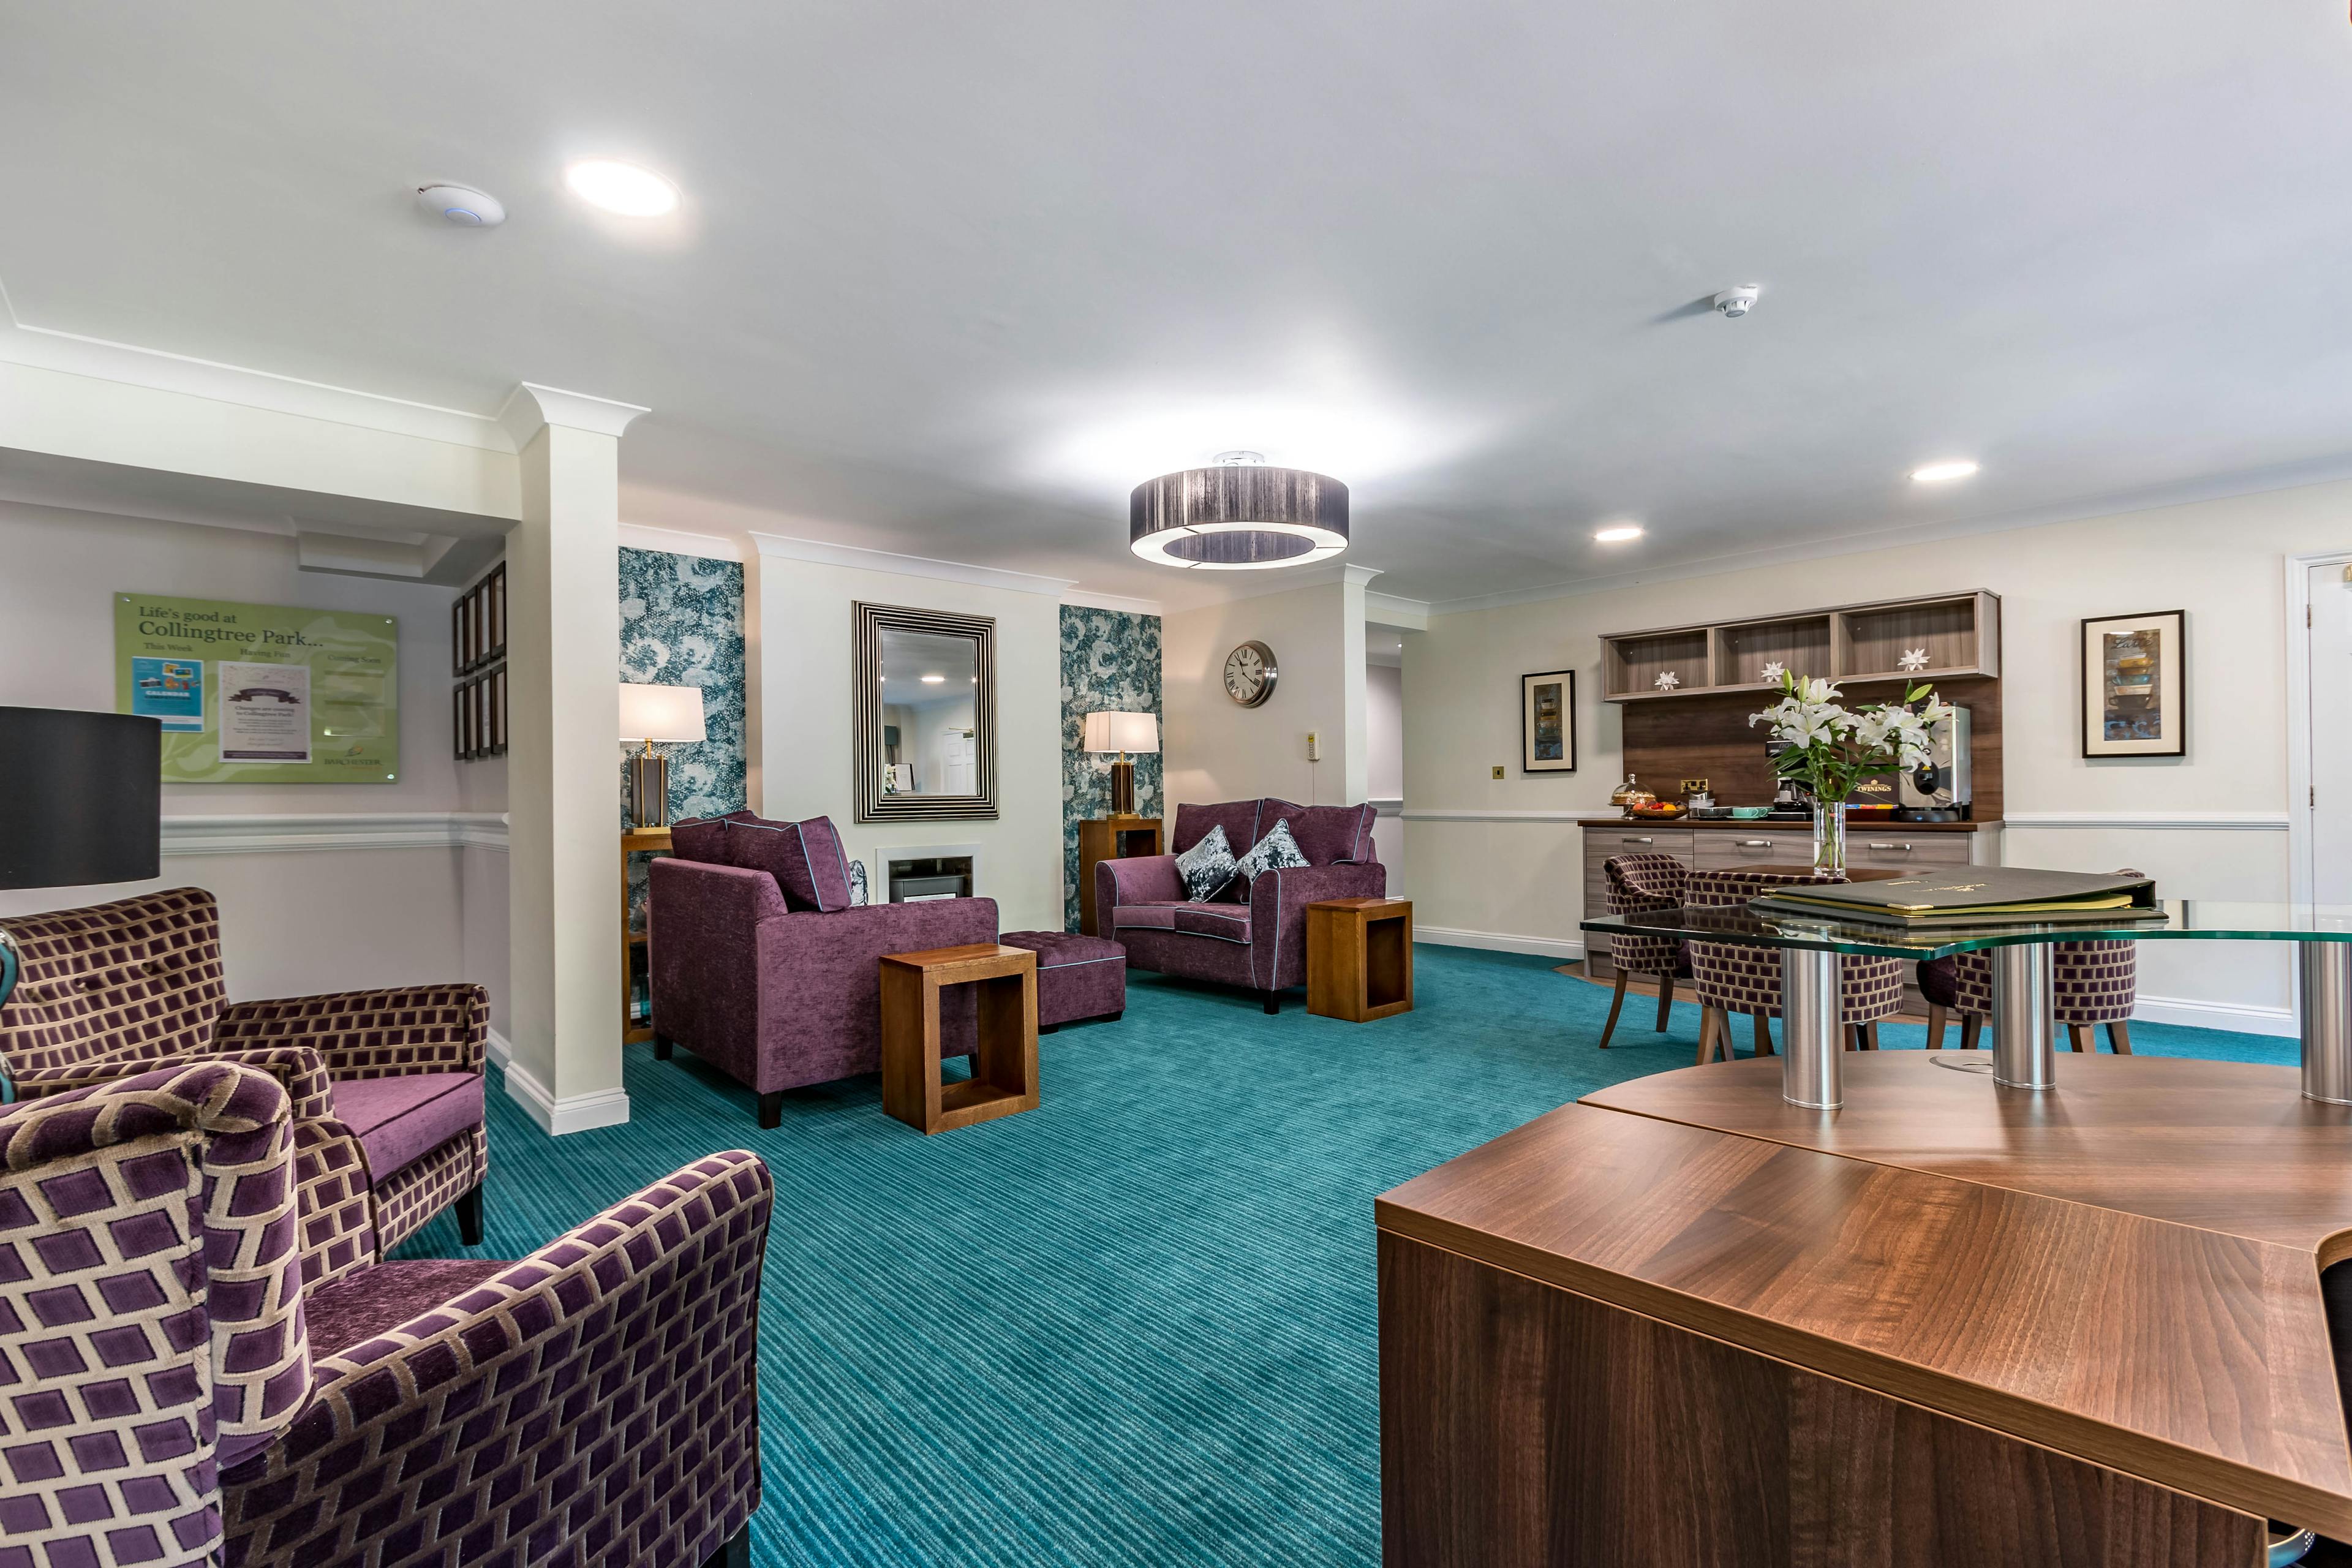 Barchester Healthcare - Collingtree Park care home 12